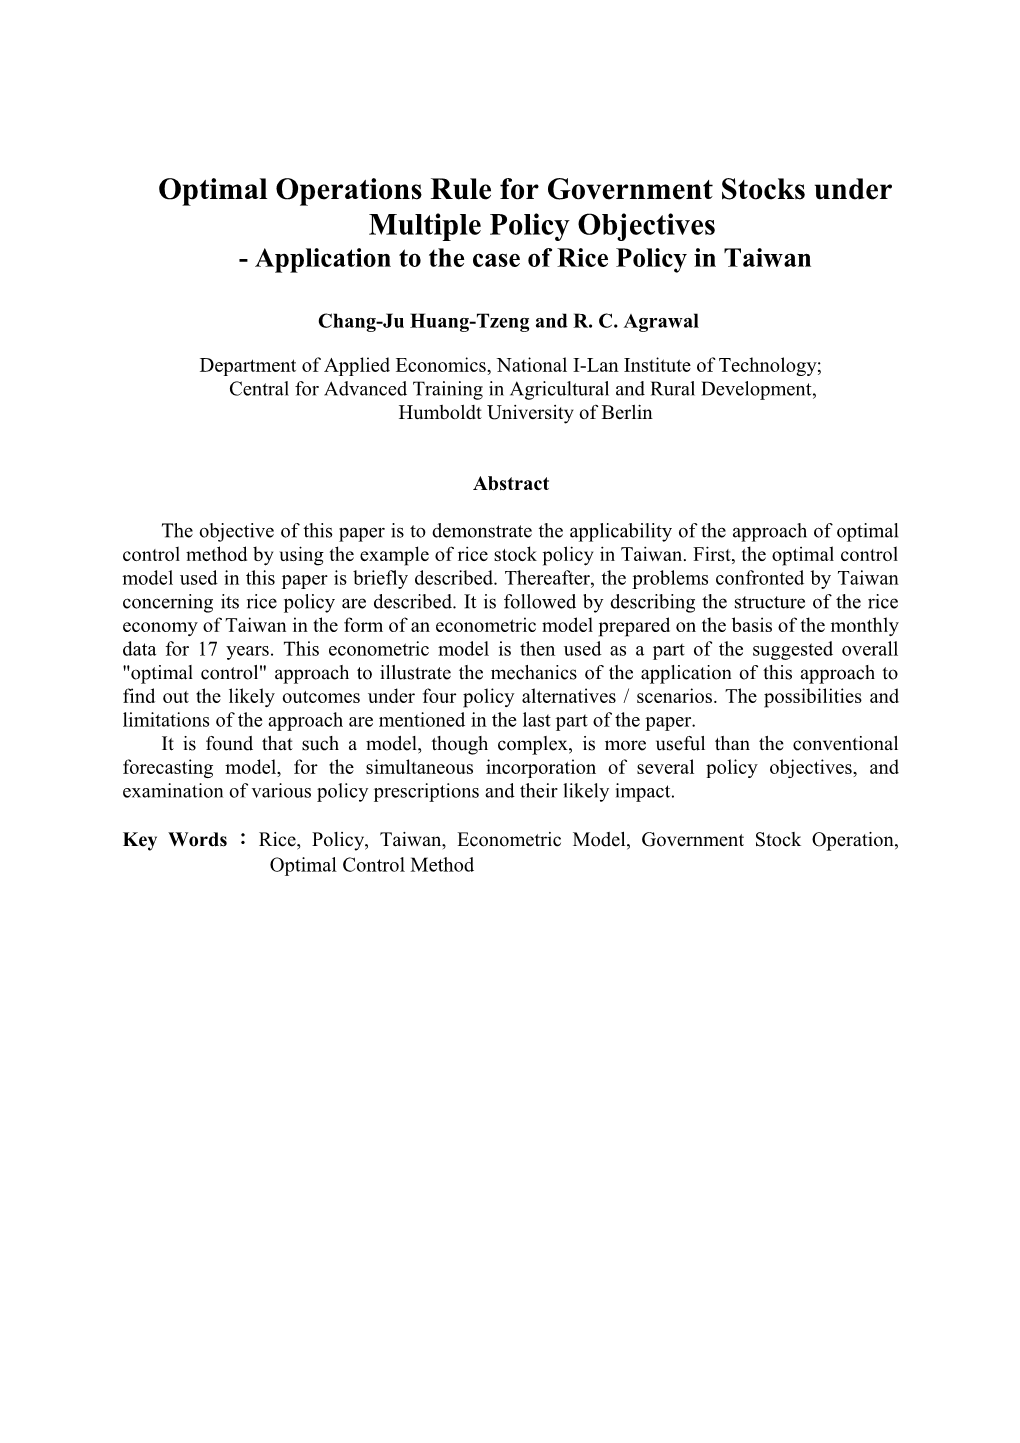 Optimal Operations Rule for Government Stocks Under Multiple Policy Objectives